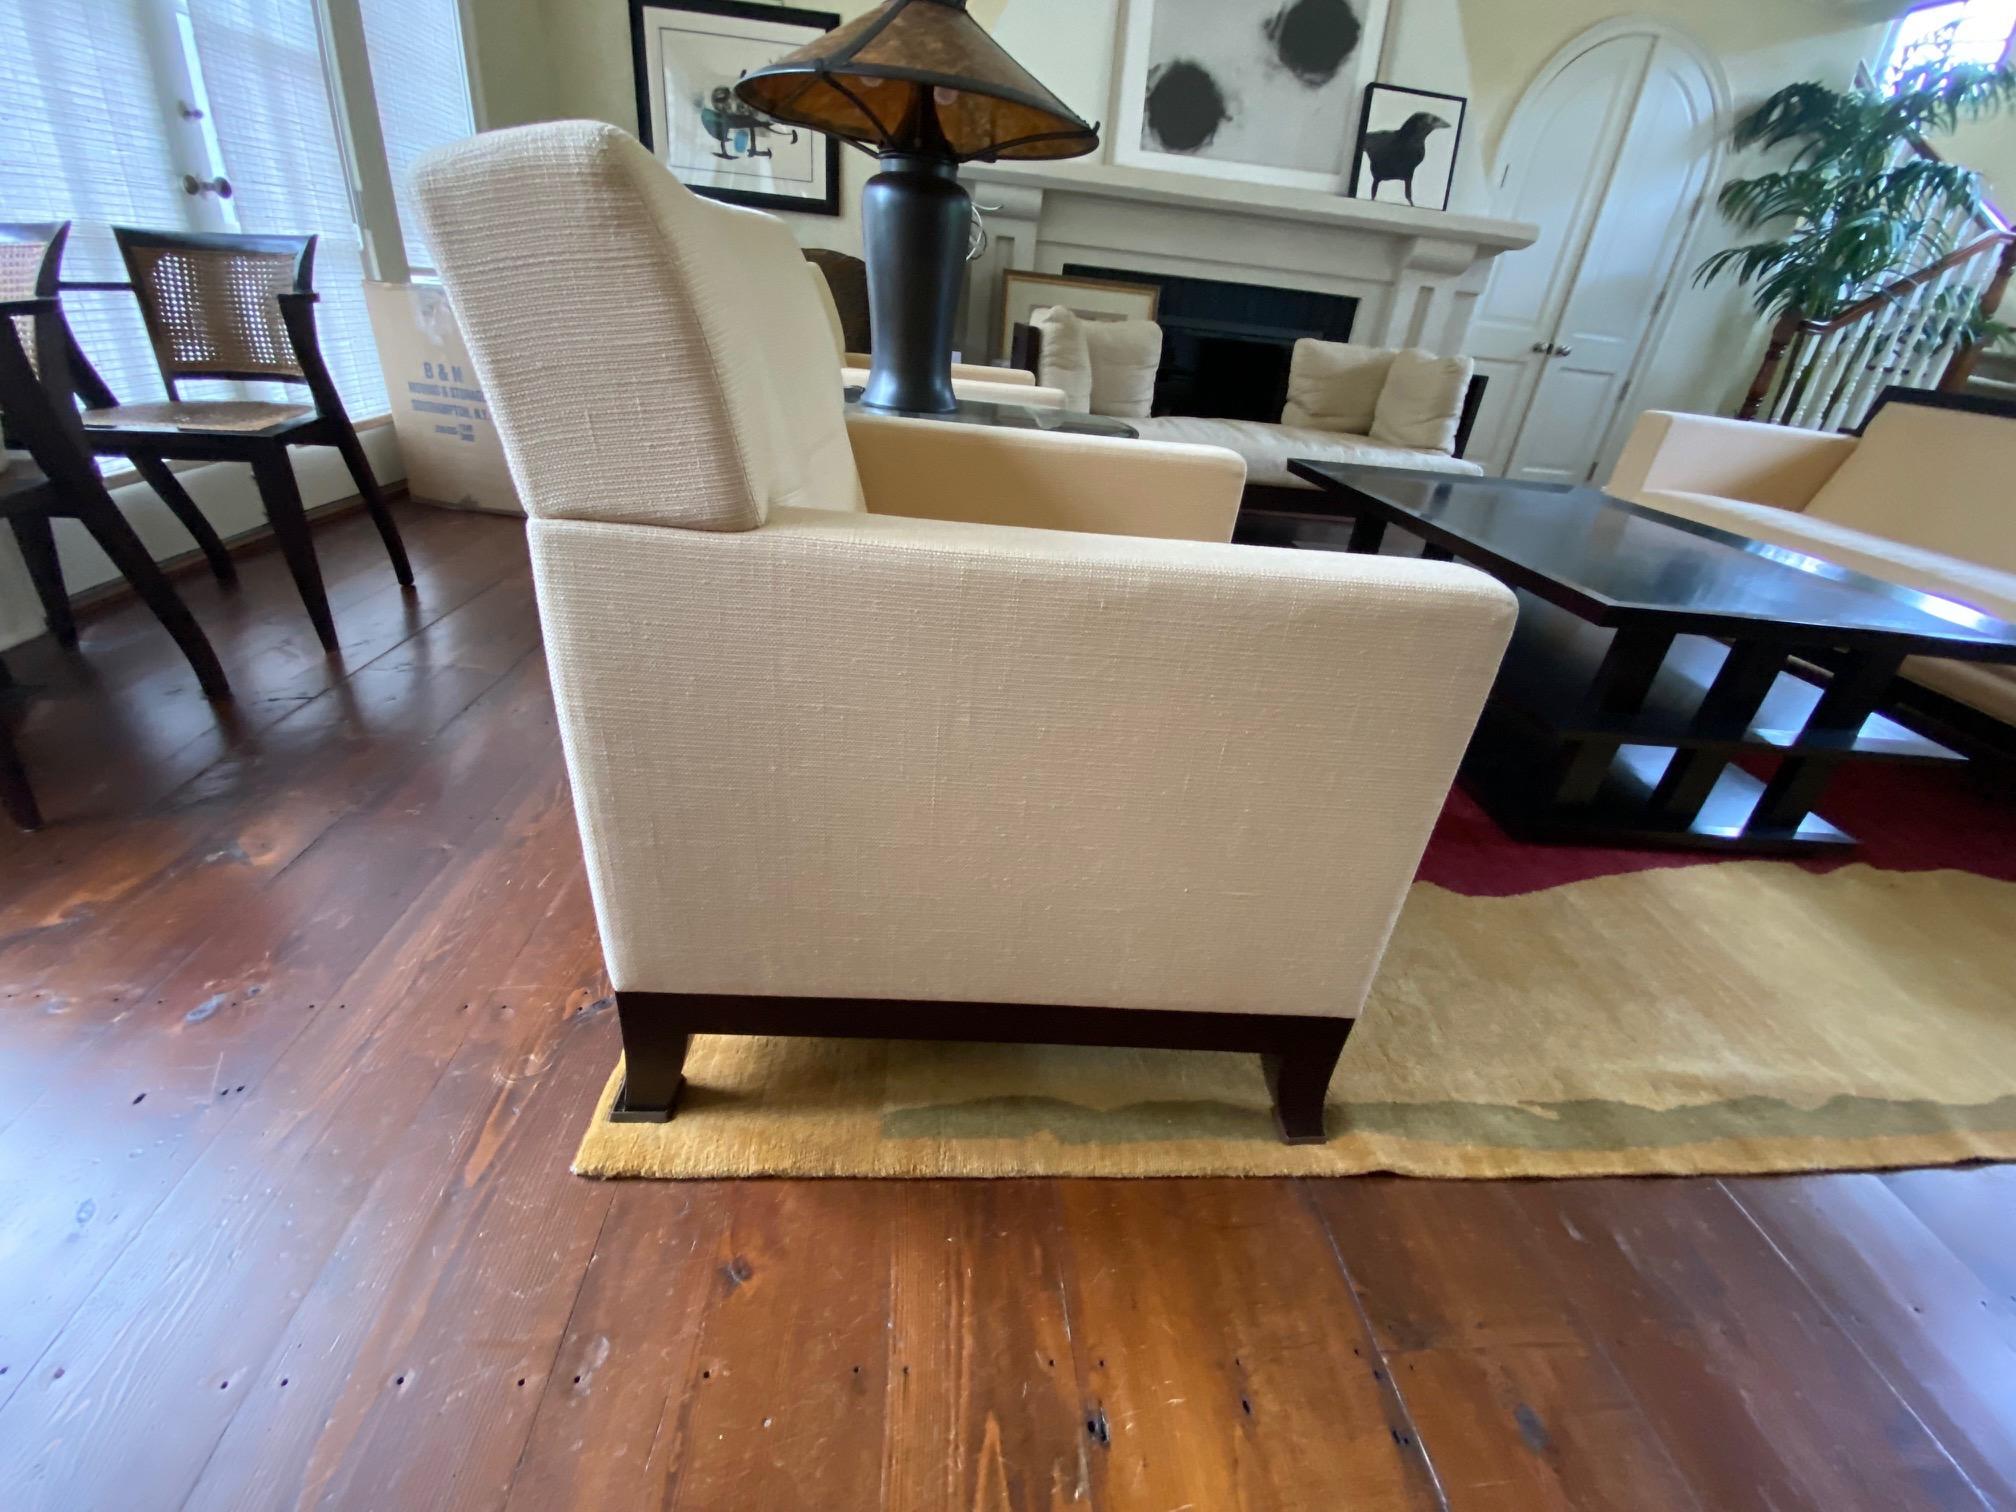 Custom mahogany han club chair by Jiun Ho
This custom club chair was originally specified by Clodagh Design. Clean, refined lines and excellent seaming down the center back making four quadrants. Interesting frame design, boxed arms, slightly